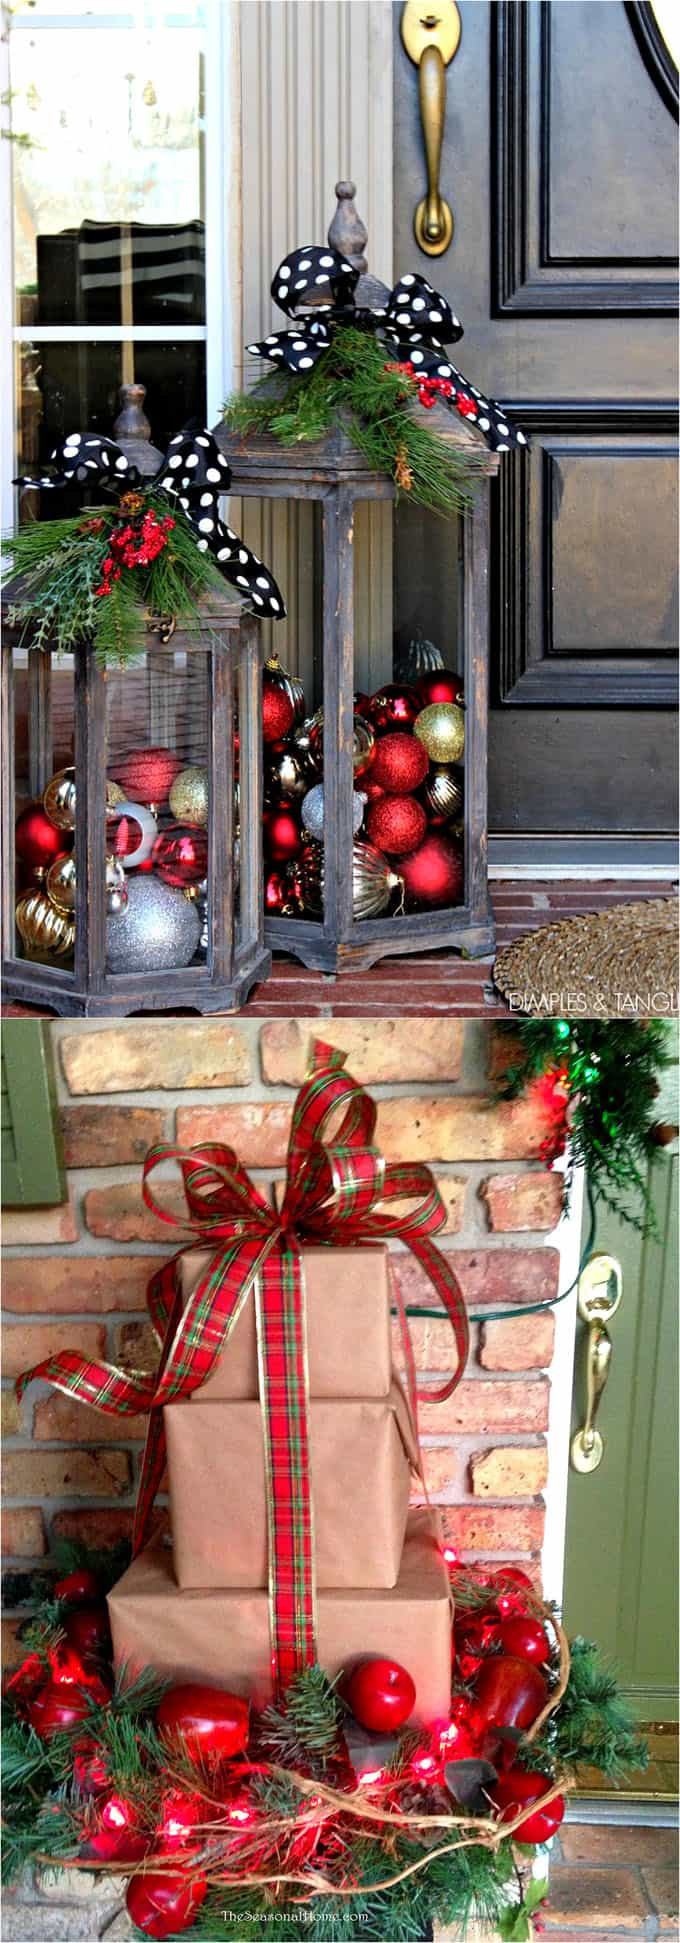 DIY Christmas Lawn Decorations
 Gorgeous Outdoor Christmas Decorations 32 Best Ideas